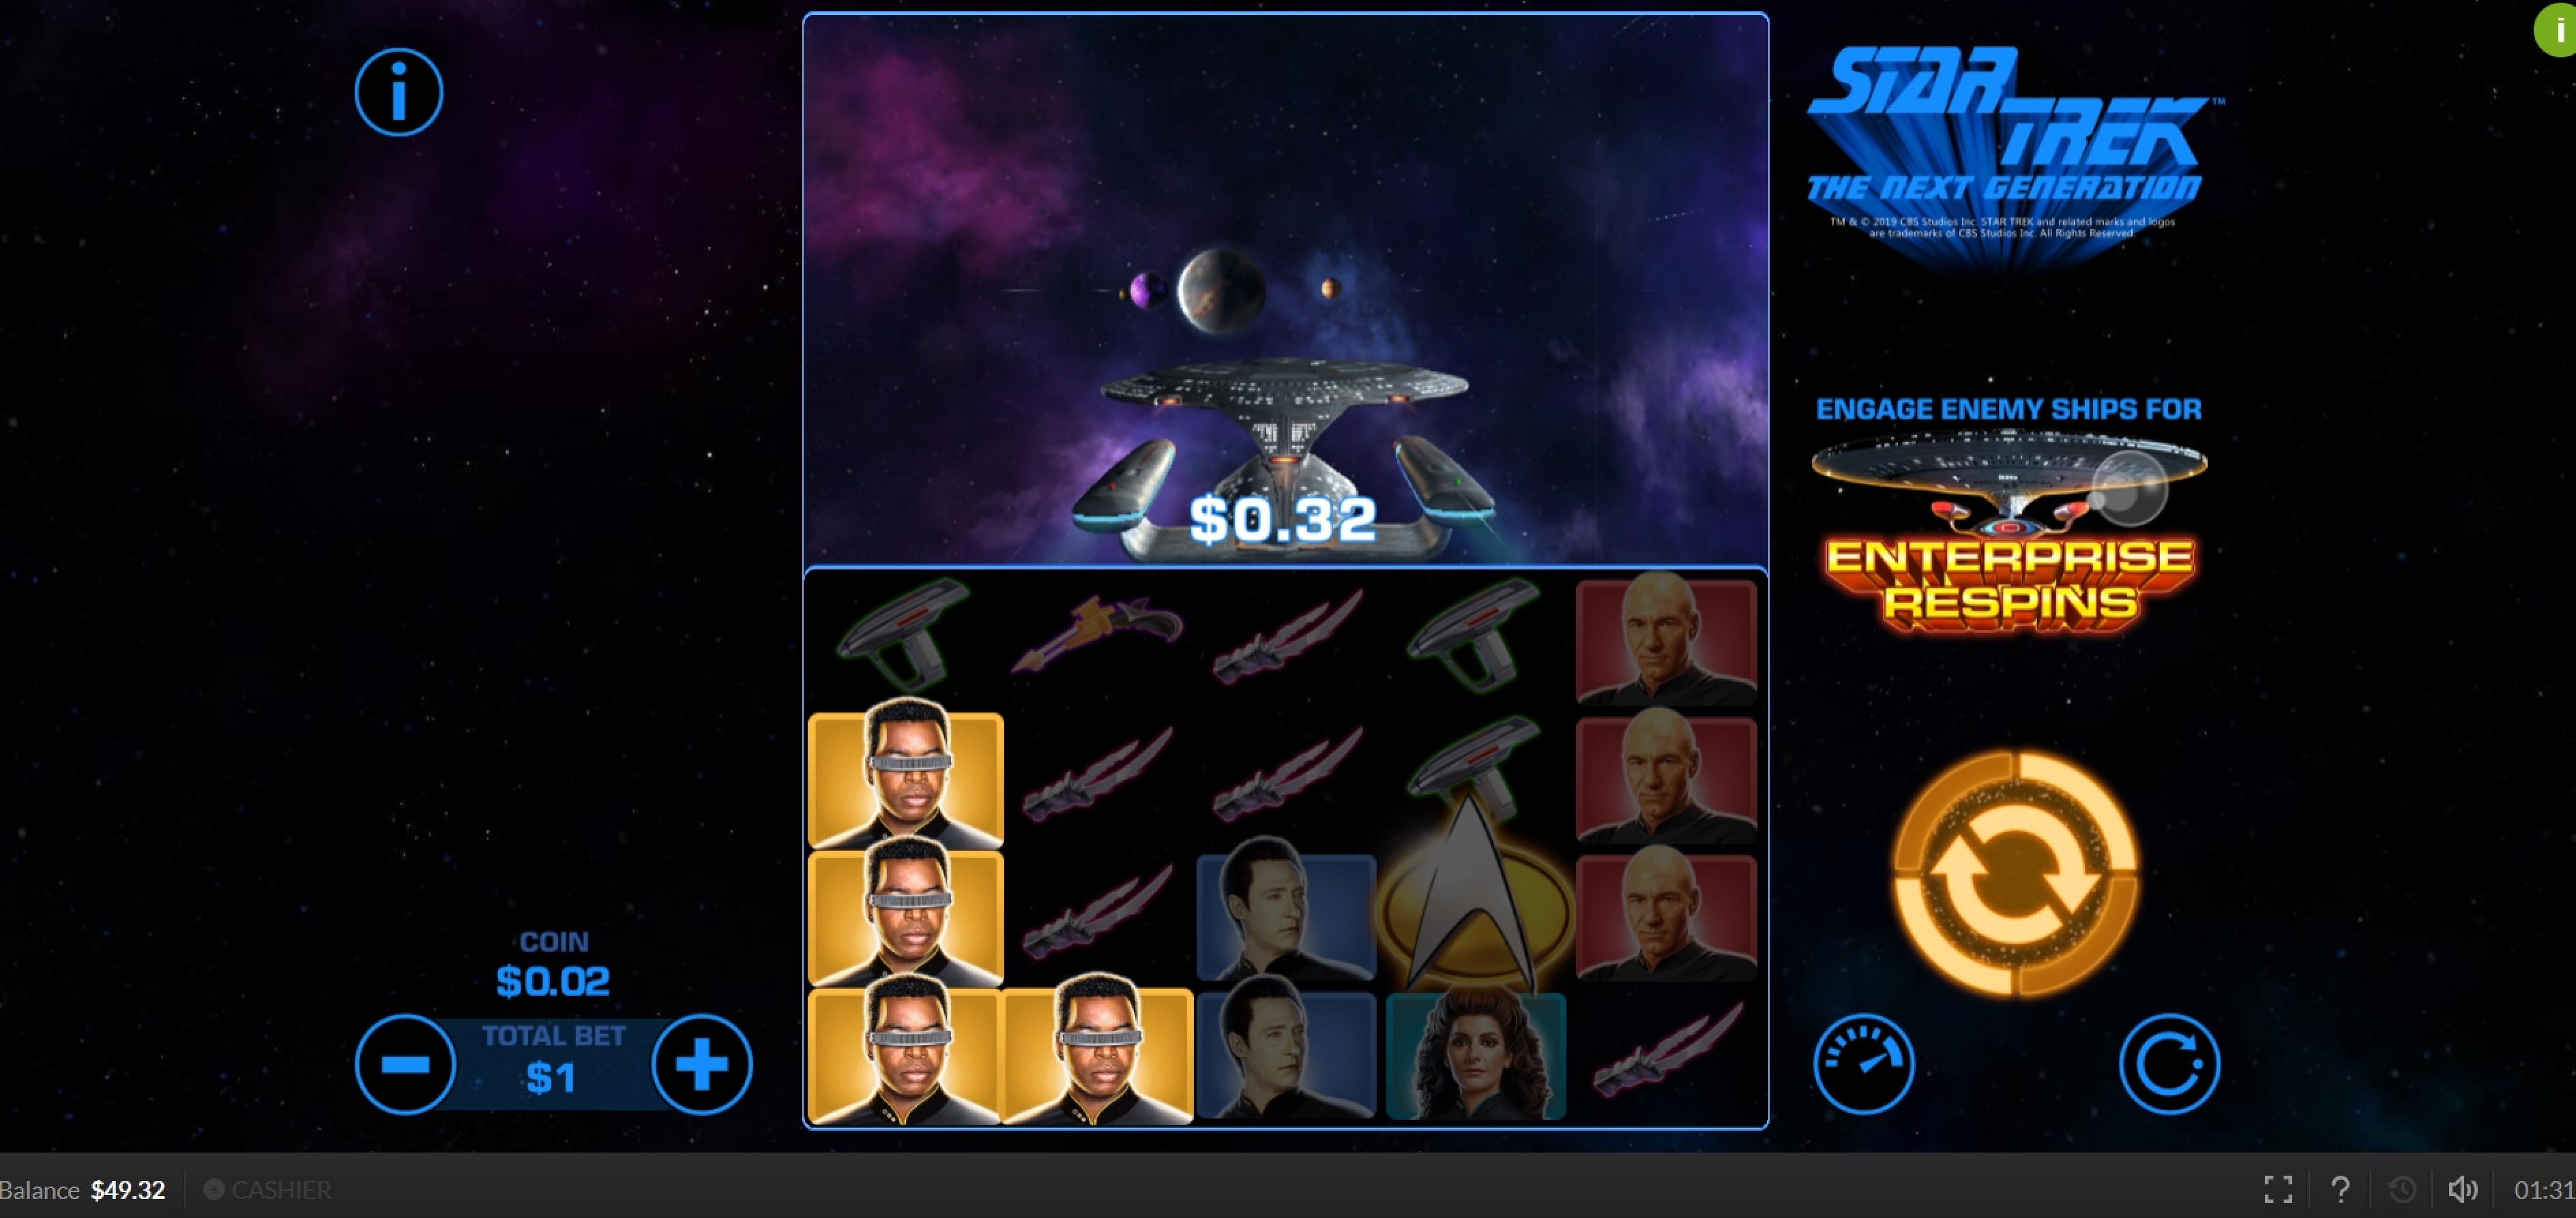 Win Money in Star Trek: The Next Generation Free Slot Game by Skywind